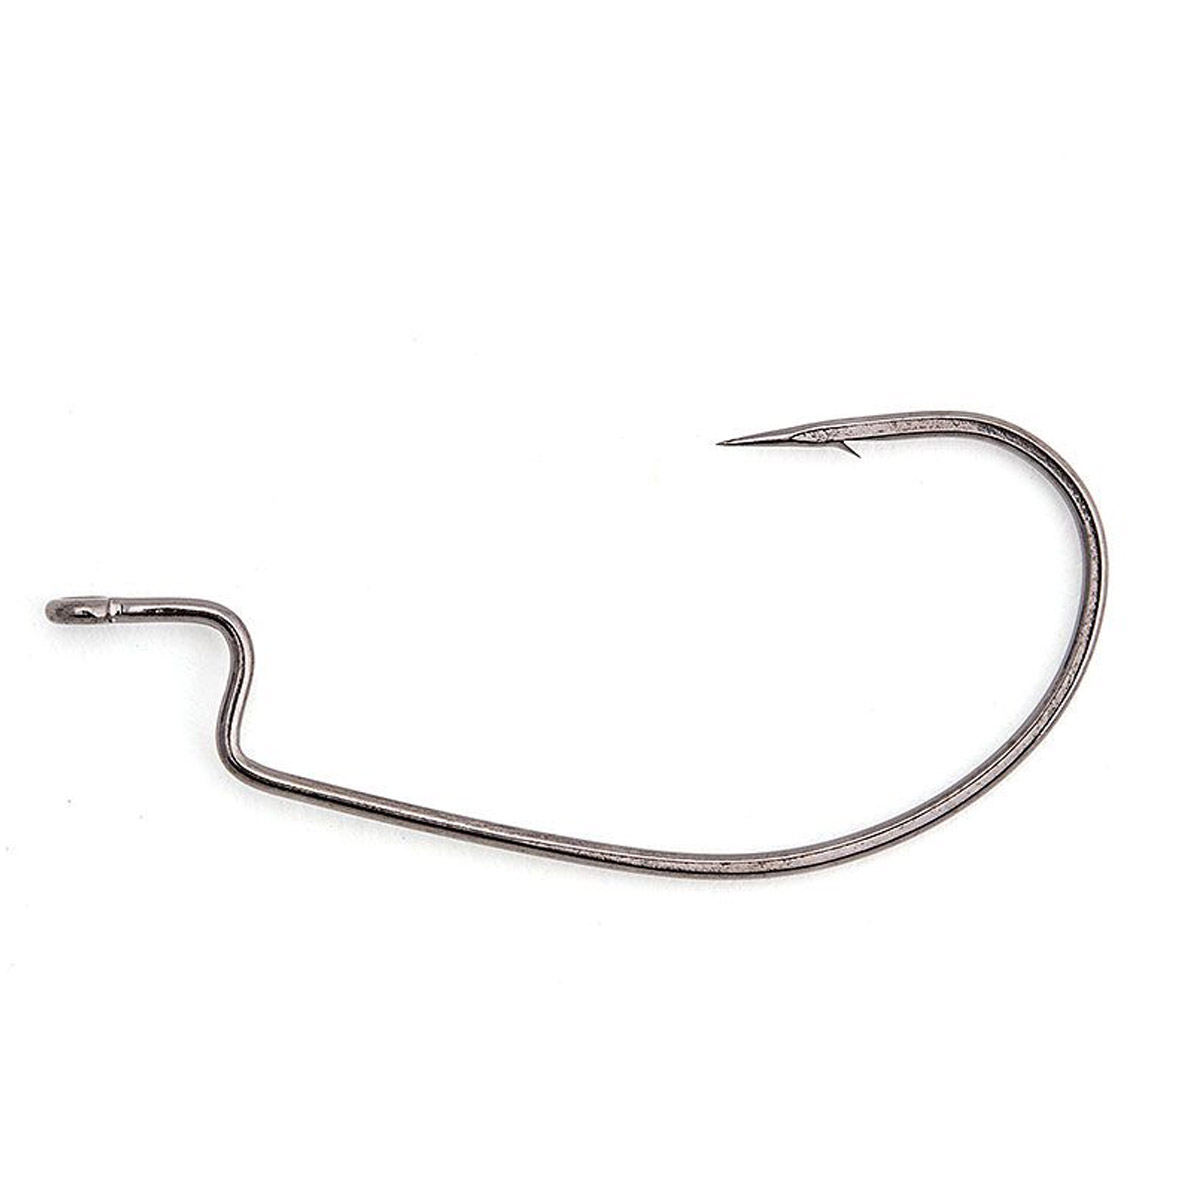 Decoy S.S. Finesse Offset Hook Worm 19  -  4 -  2 -  1 -  6 -  10 -  8 -  3